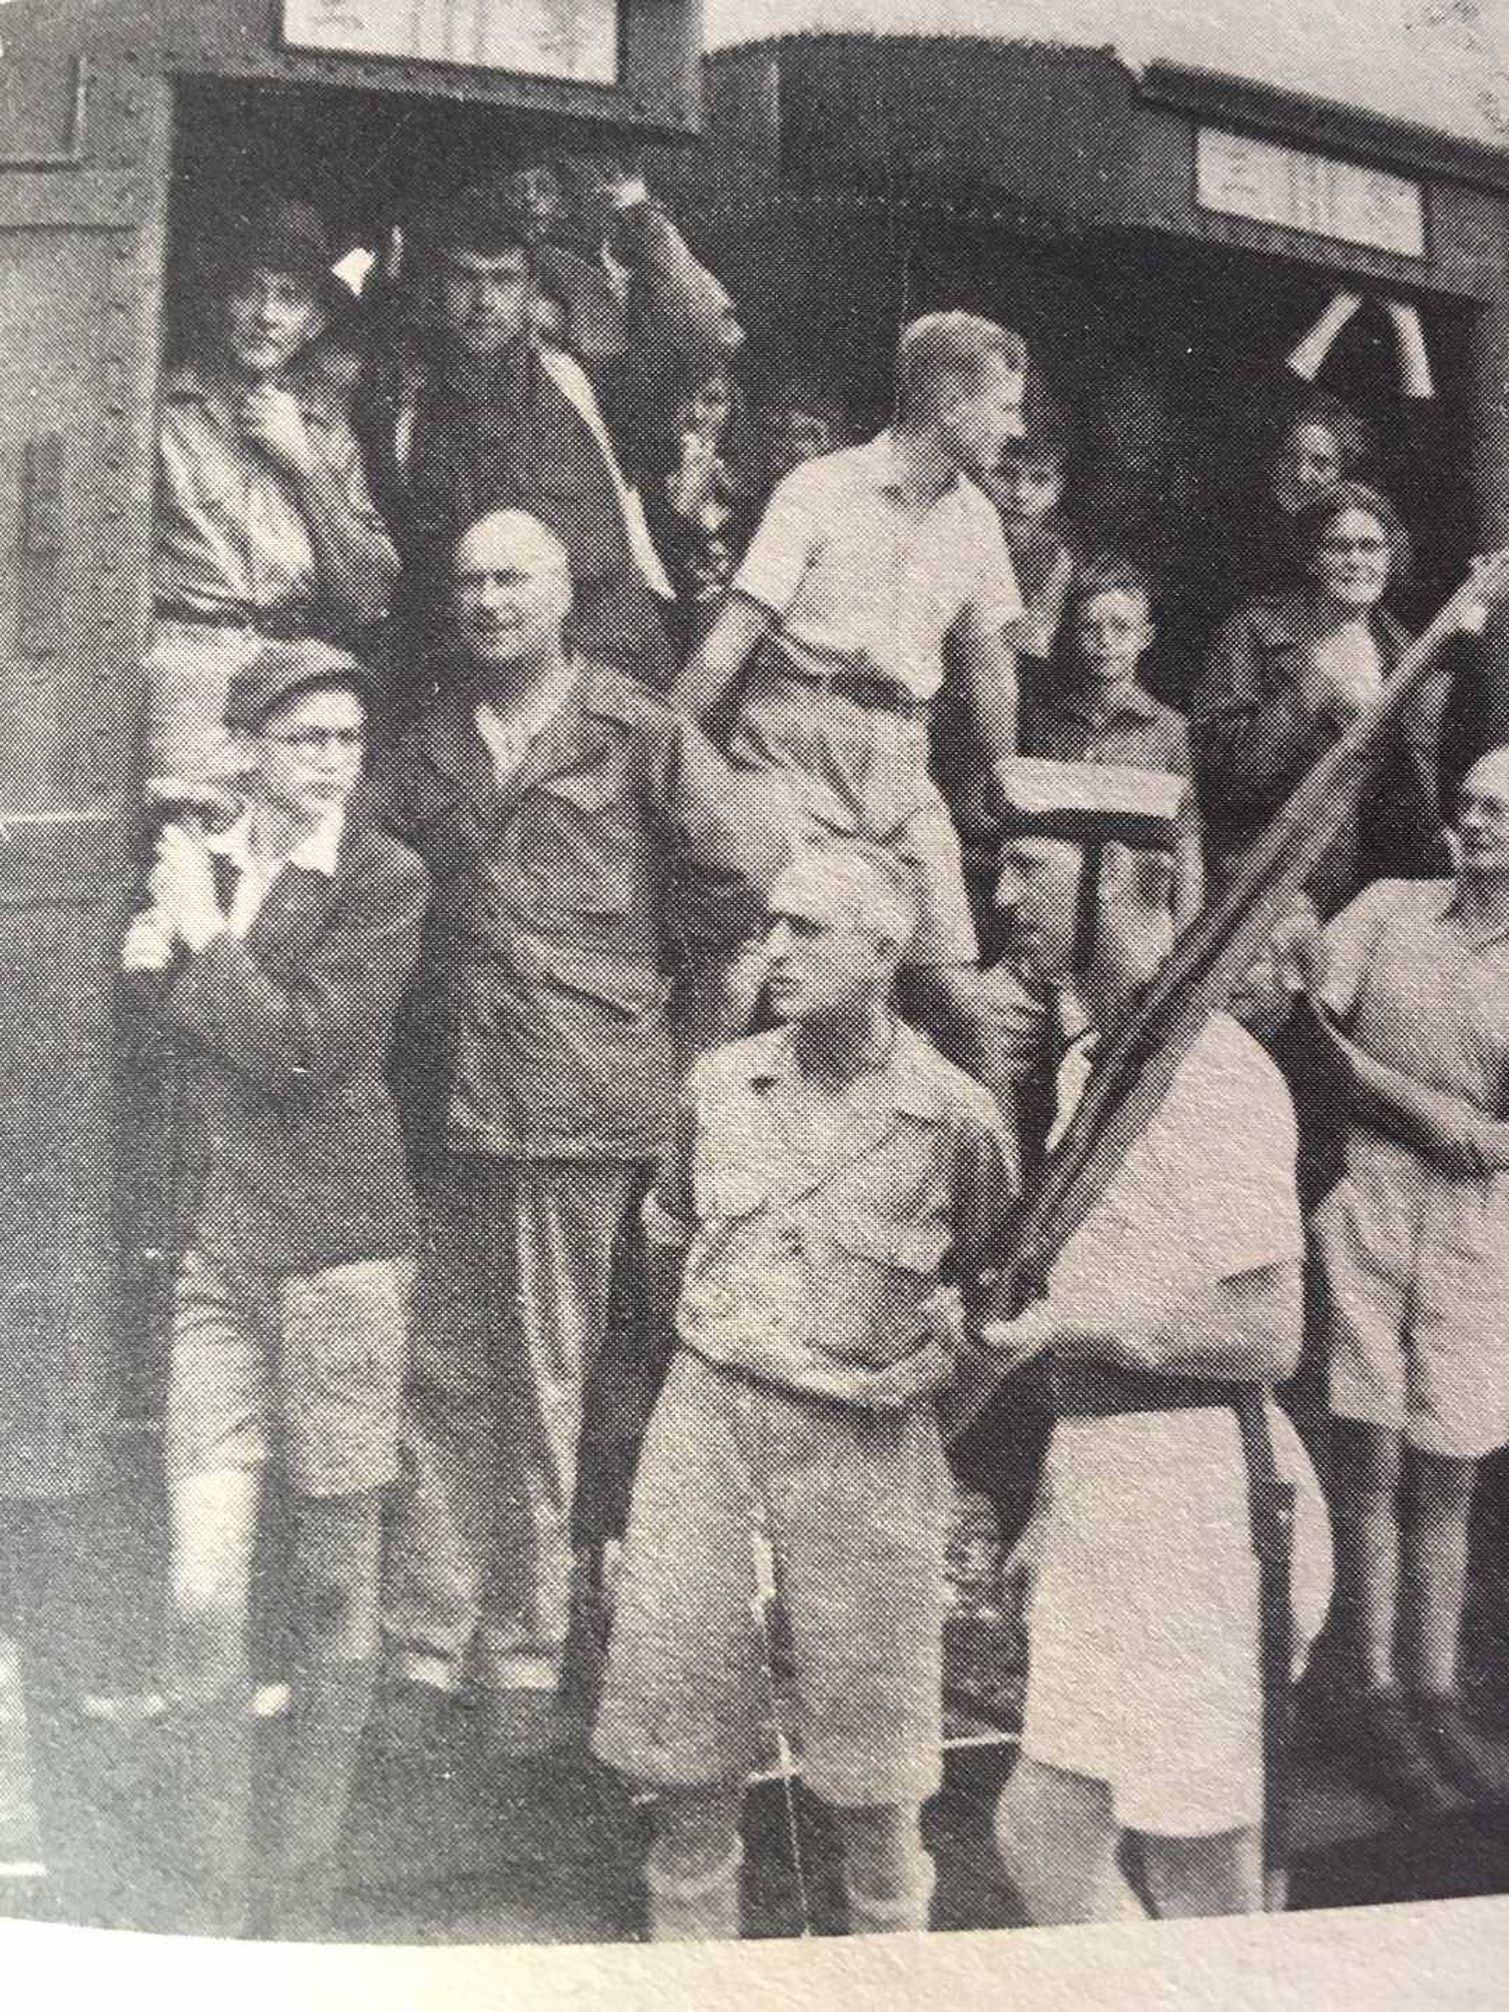 Group of students and soldiers staring into distance with concerned looks on their faces